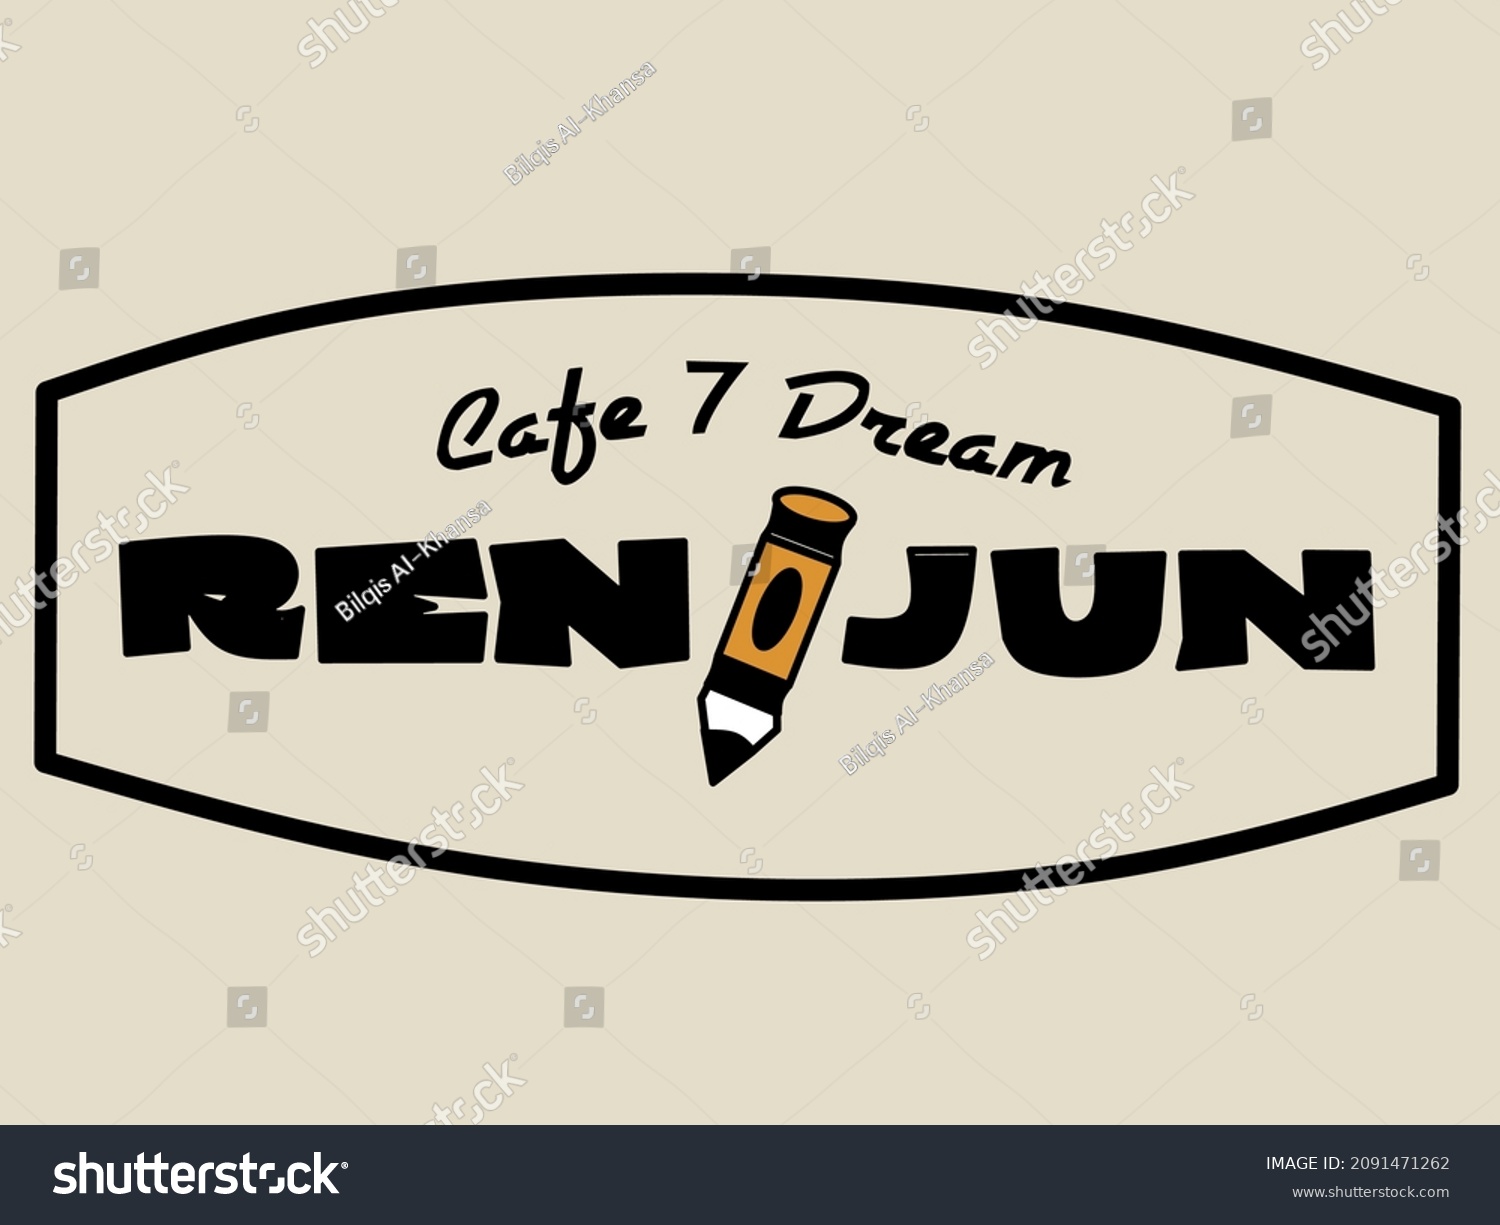 SVG of illustration vector graphic of
cafe 7 dream and pencil
perfect for icon, background, wallpaper, kpop svg